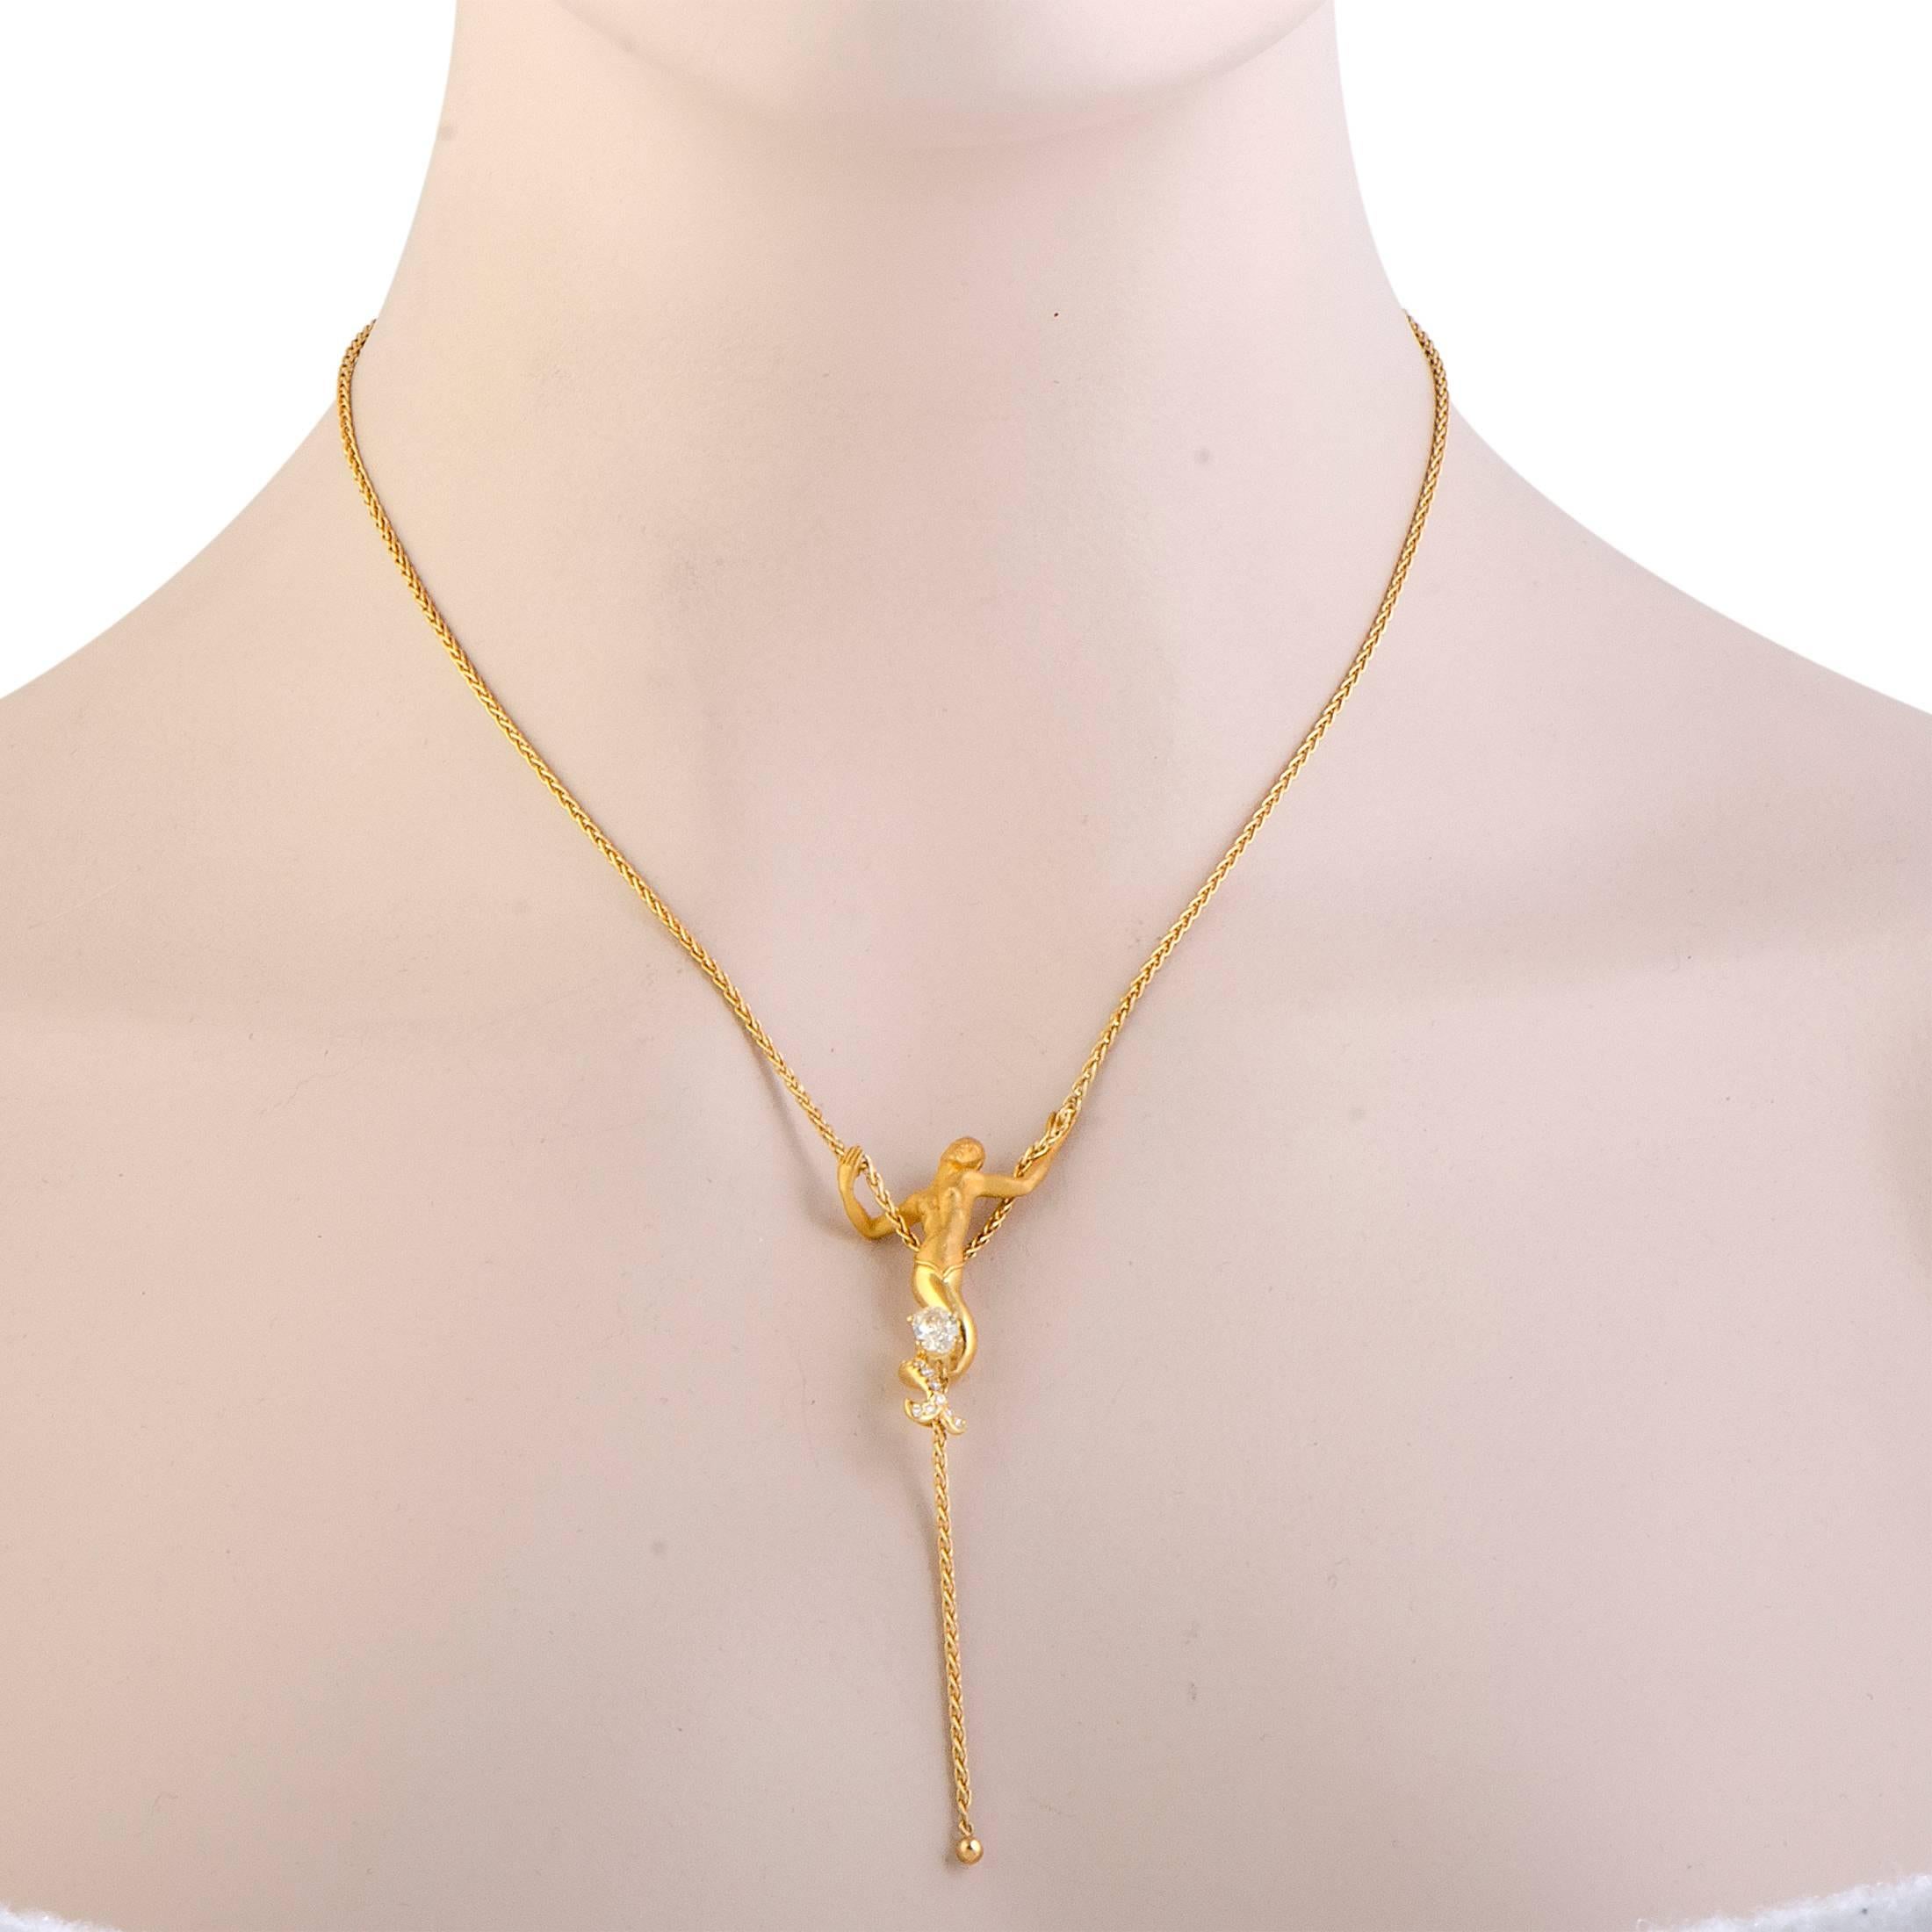 Featuring the exceptionally aesthetically appealing design characteristic for Carrera y Carrera pieces, this gorgeous necklace boasts nifty, classy appeal. The necklace is made of elegant 18K yellow gold and features a sublime pendant decorated with